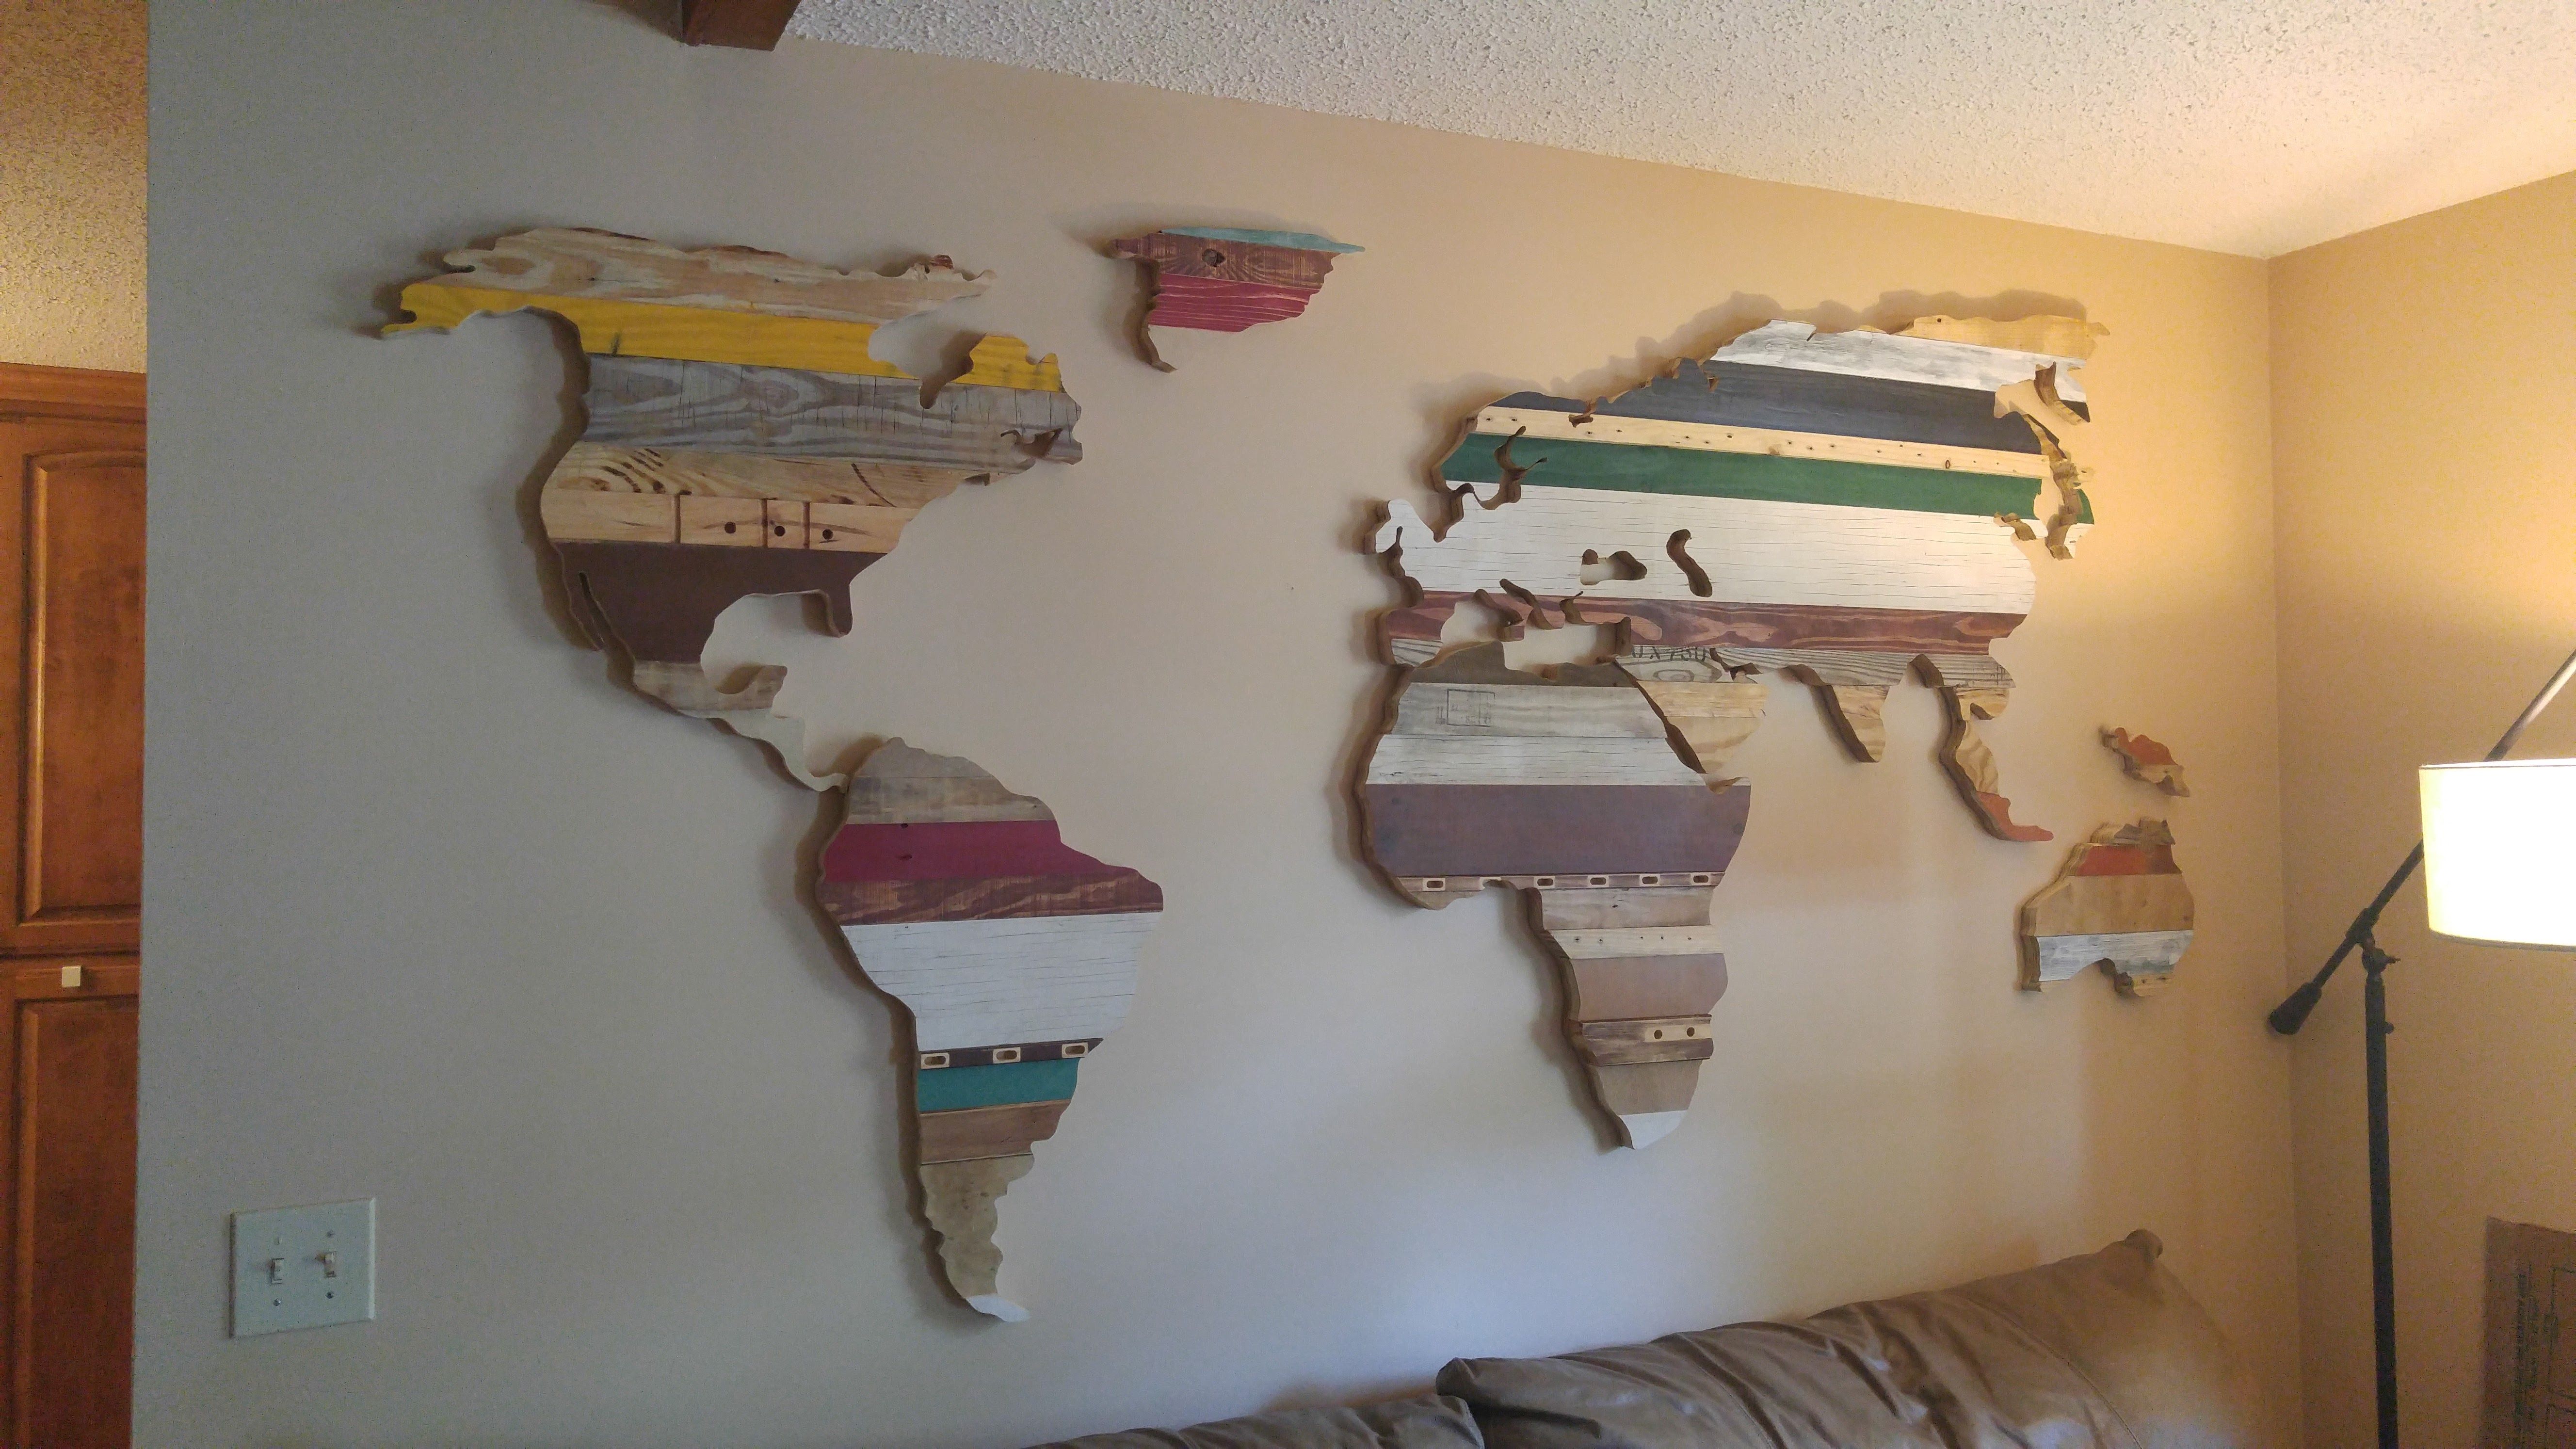 World Map  Uptown Woodworks